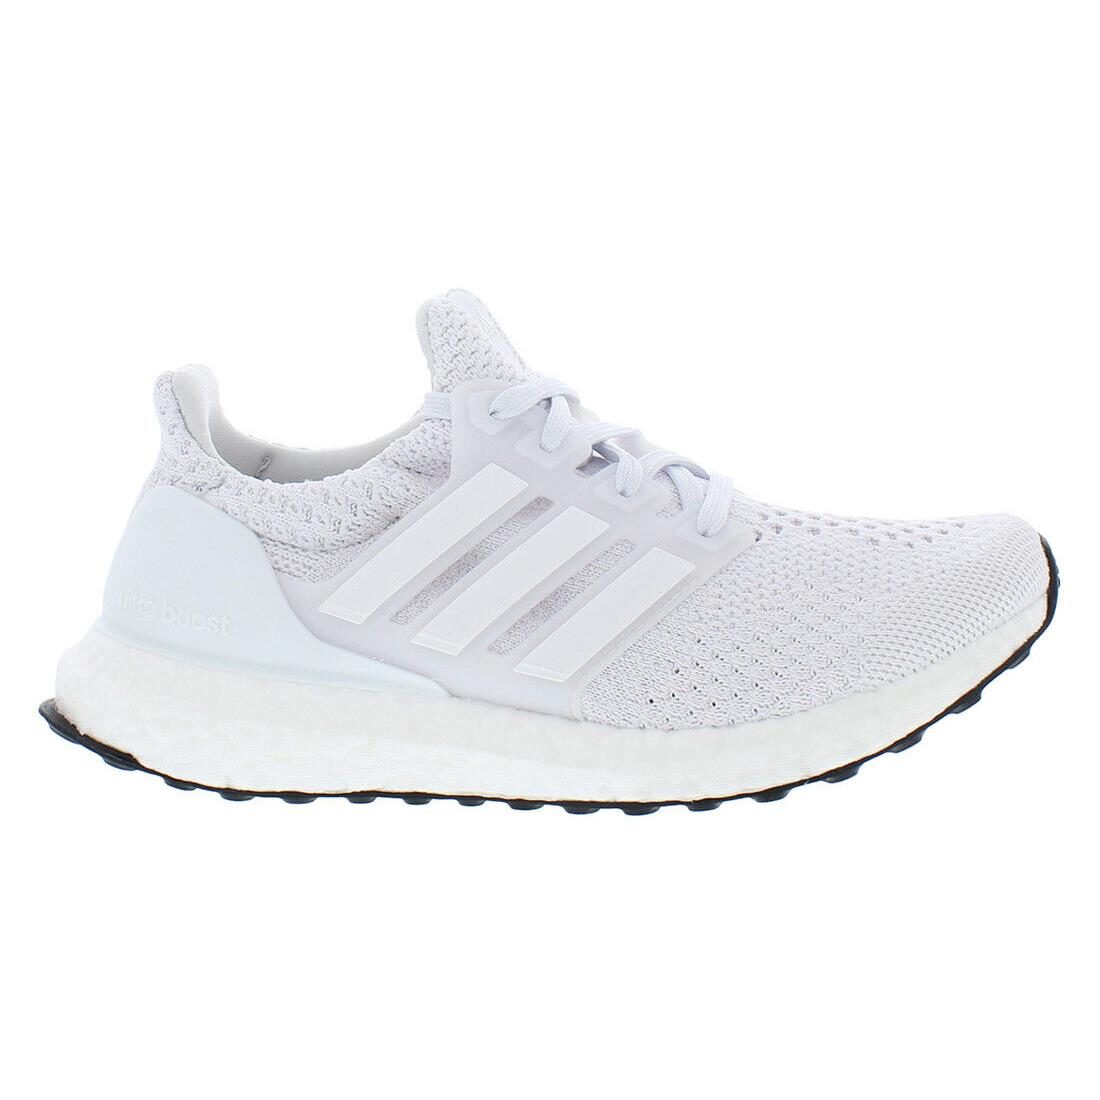 Adidas Ultraboost 5.0 Dna Womens Shoes - White, Main: White